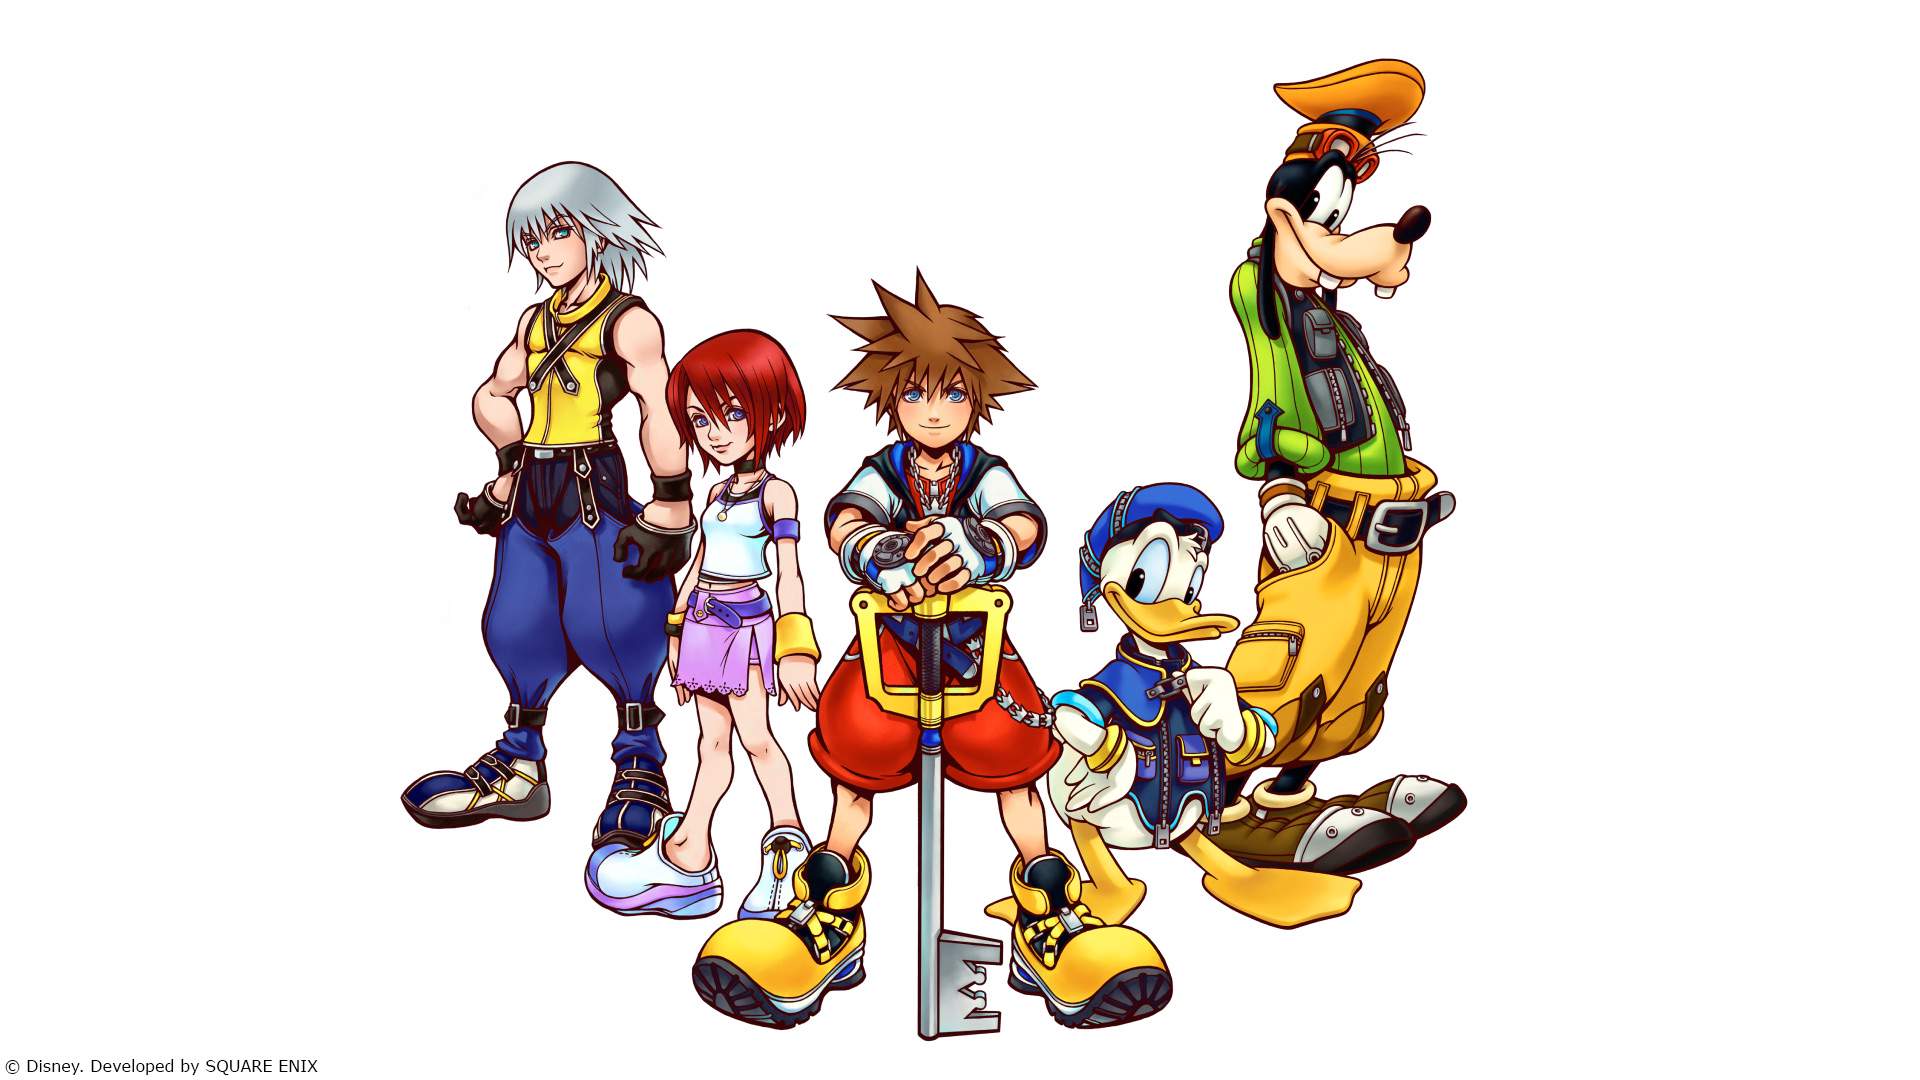 Should You Play All The Kingdom Hearts Games?